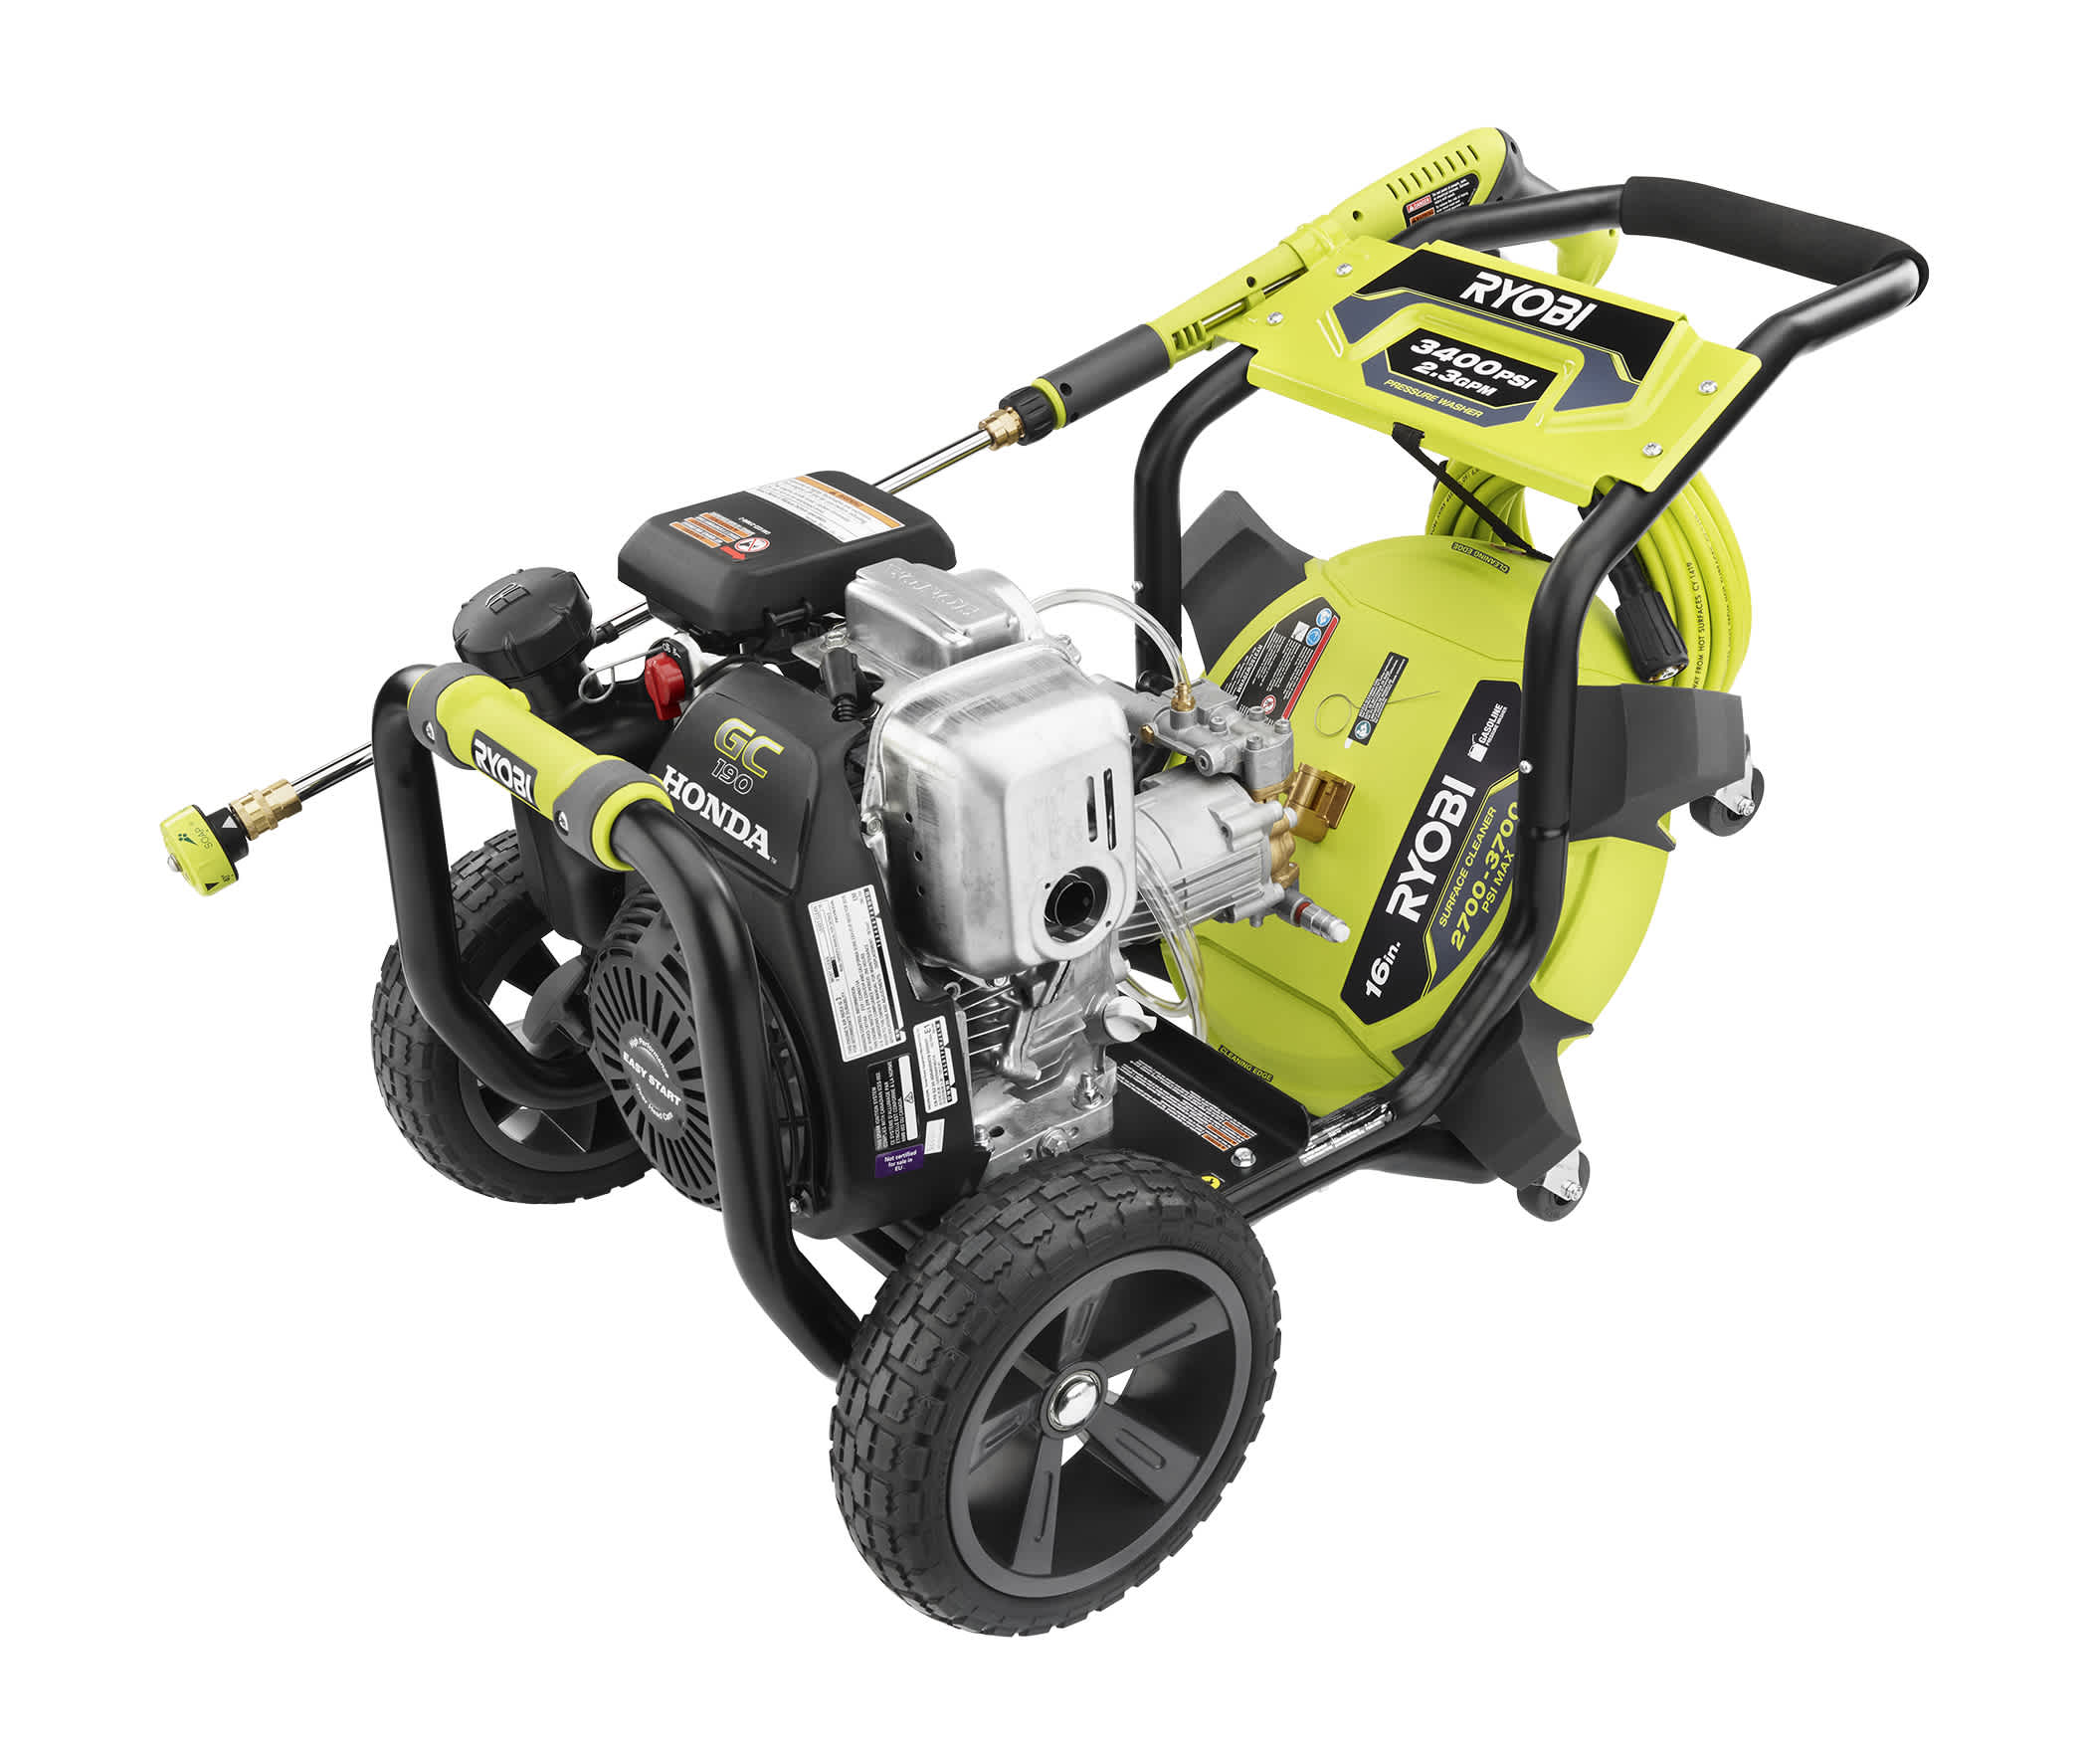 Feature Image for 3400 PSI HONDA GC190 GAS PRESSURE WASHER WITH 16" SURFACE CLEANER.